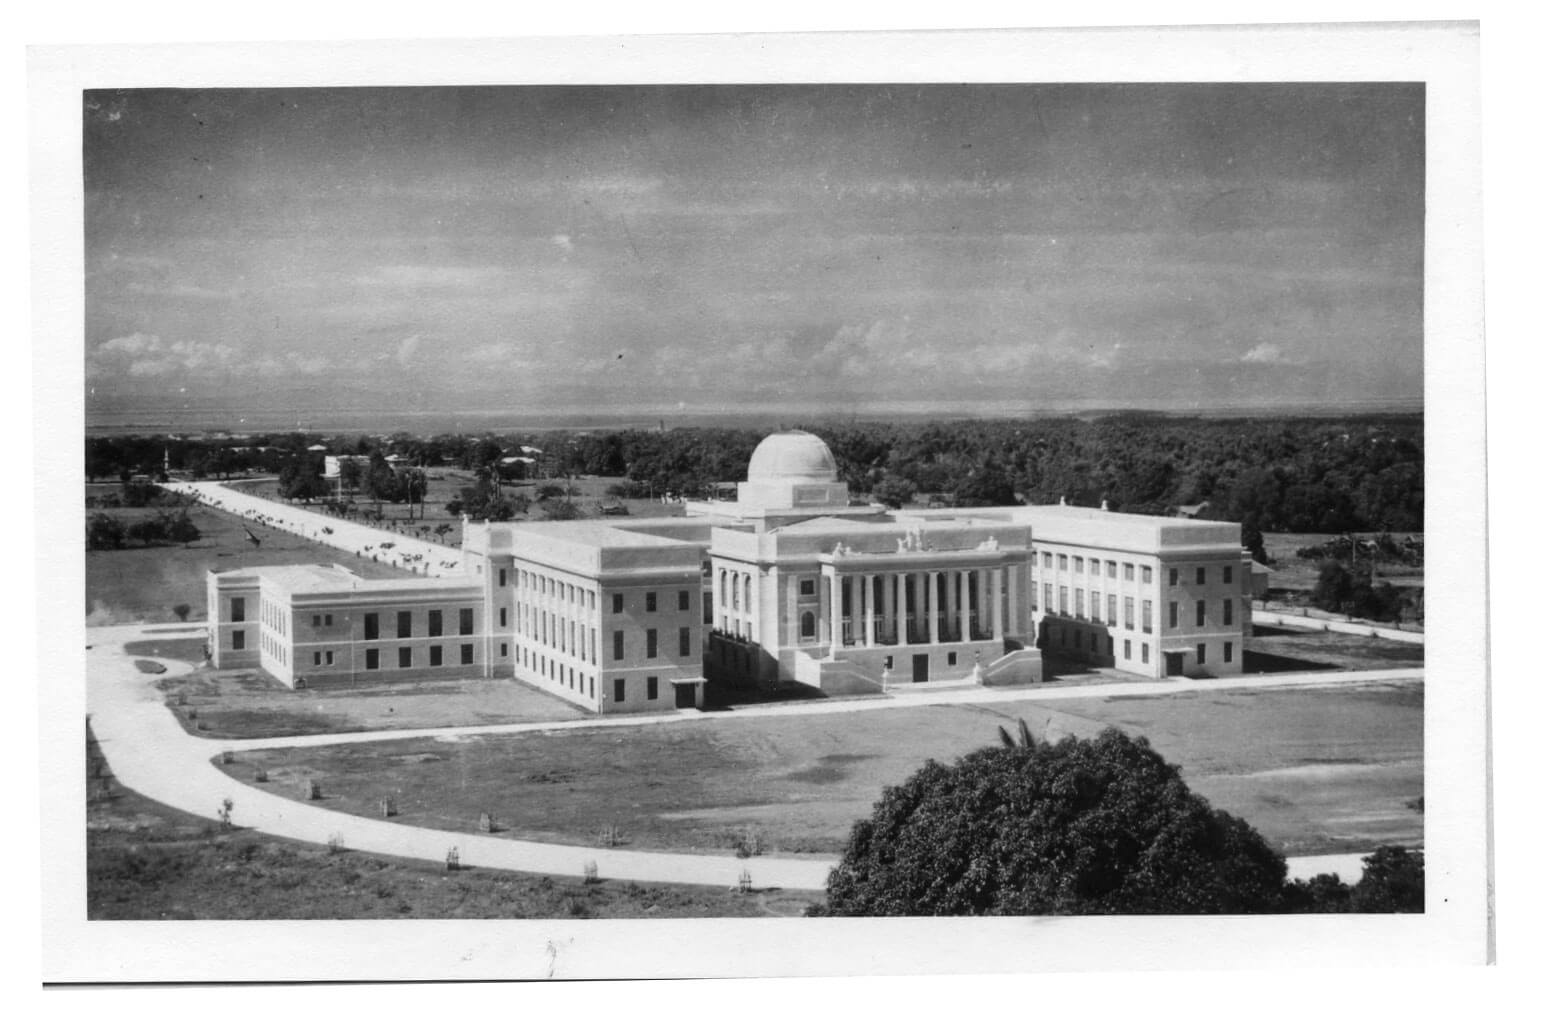 “REMOTE LOCATION.” A photo of the Capitol taken in 1940. When it was being built, people criticized the location of the new Capitol building. Radio commentators made fun of it saying that it was so remote only monkeys from the hills behind it would attend the sessions in the building. (Photo from the Medalle Collection and used with permission of the Cebuano Studies Center of the University of San Carlos.)